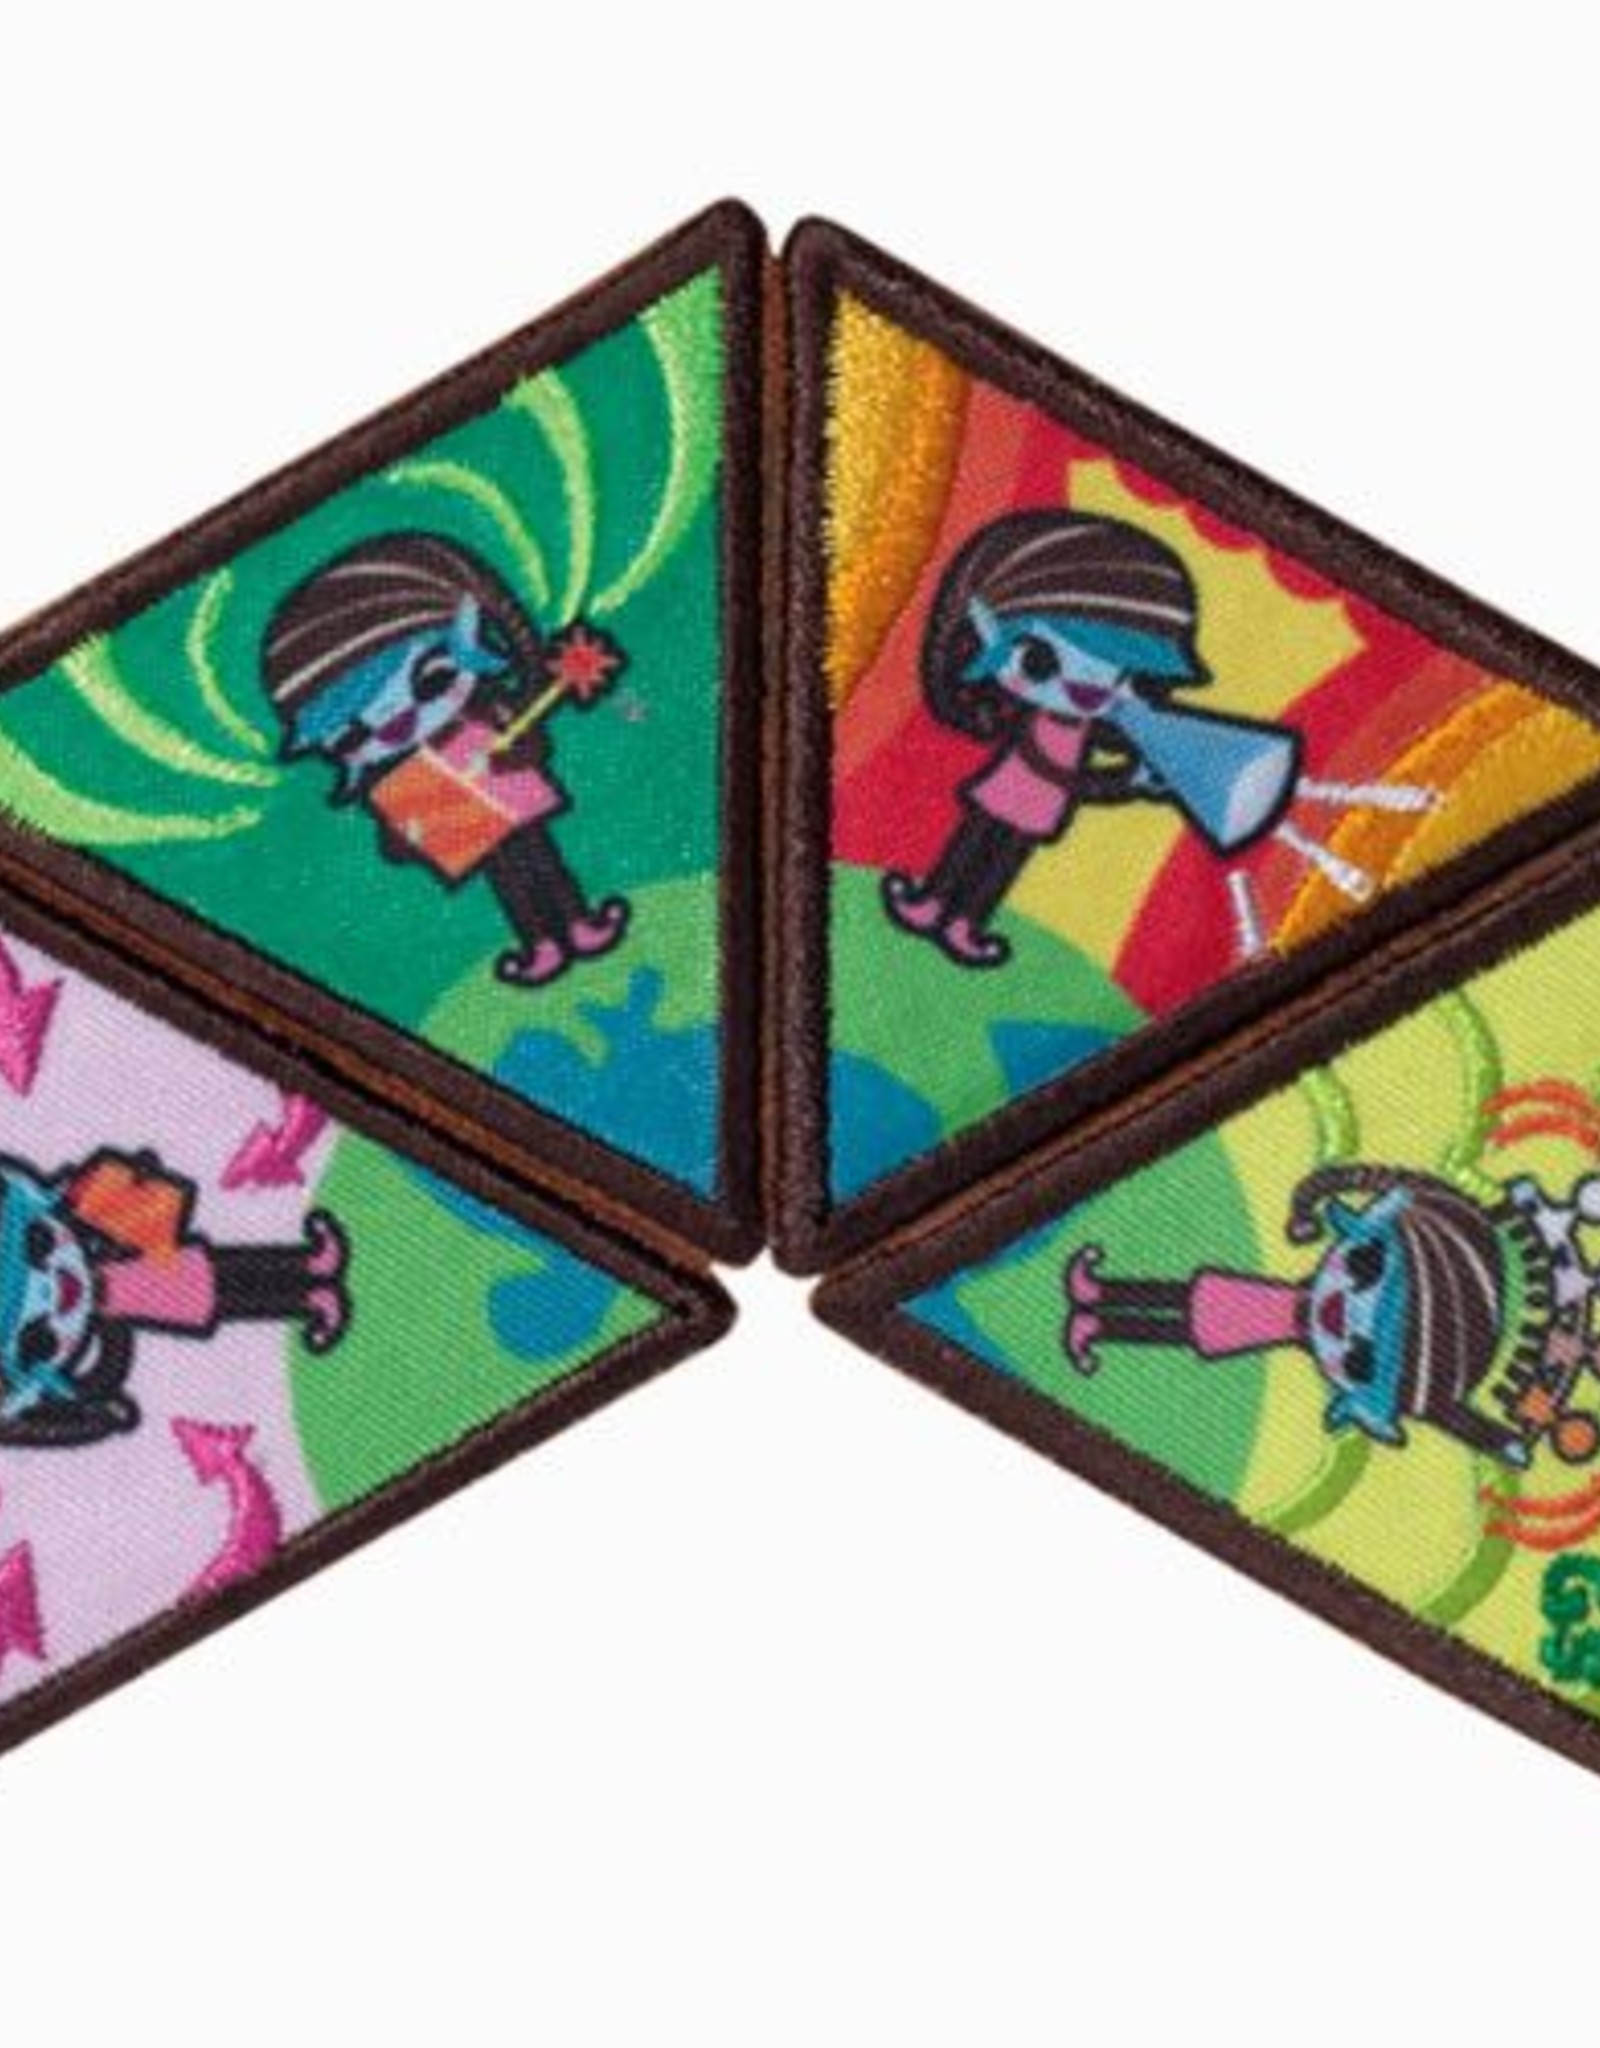 GIRL SCOUTS OF THE USA Brownie World of Girls Journey Award Set